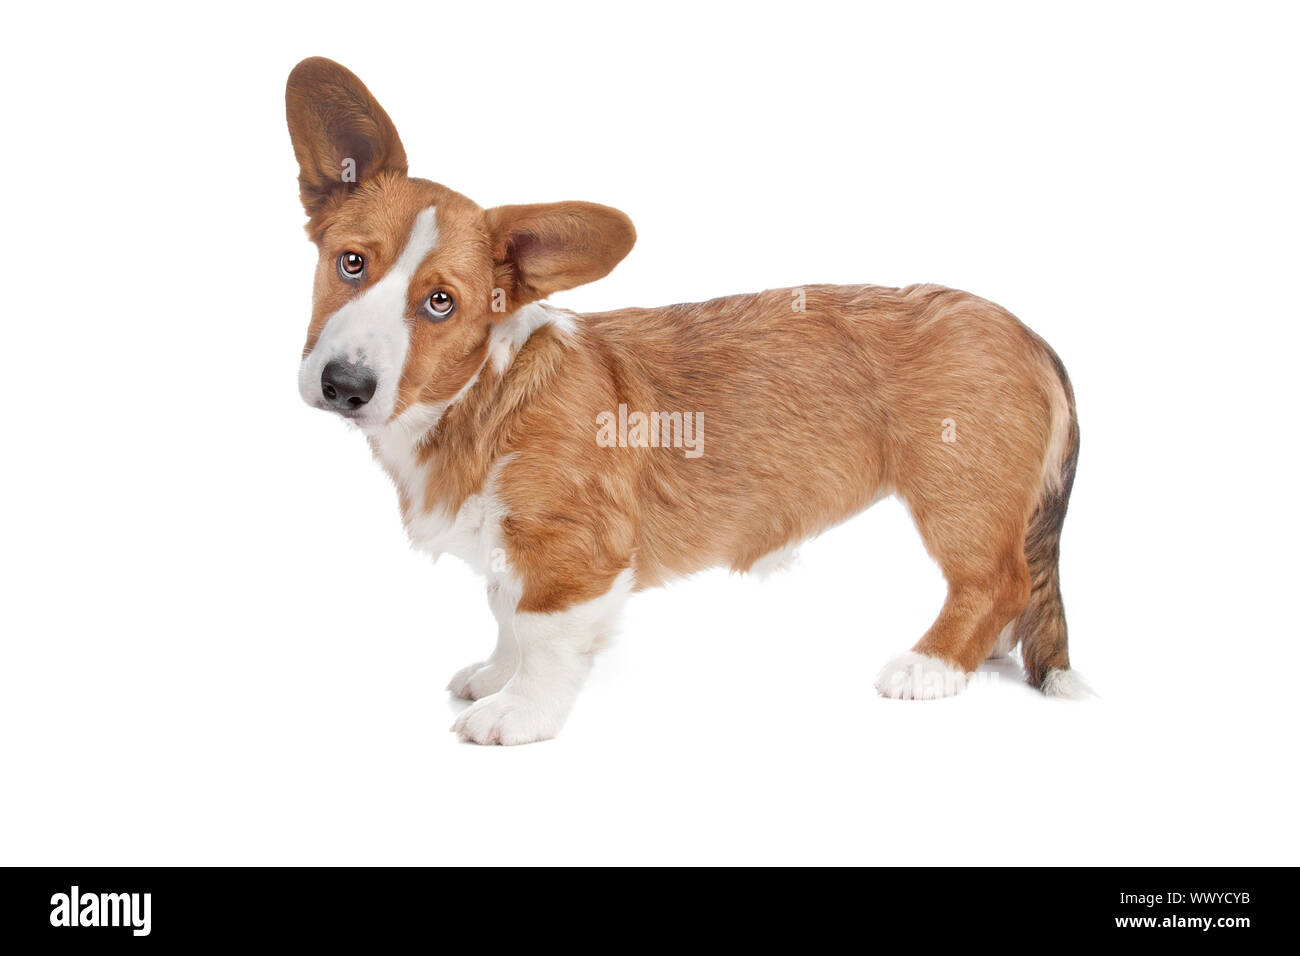 Welsh Corgi dog standing and looking at camera, isolated on a white background Stock Photo